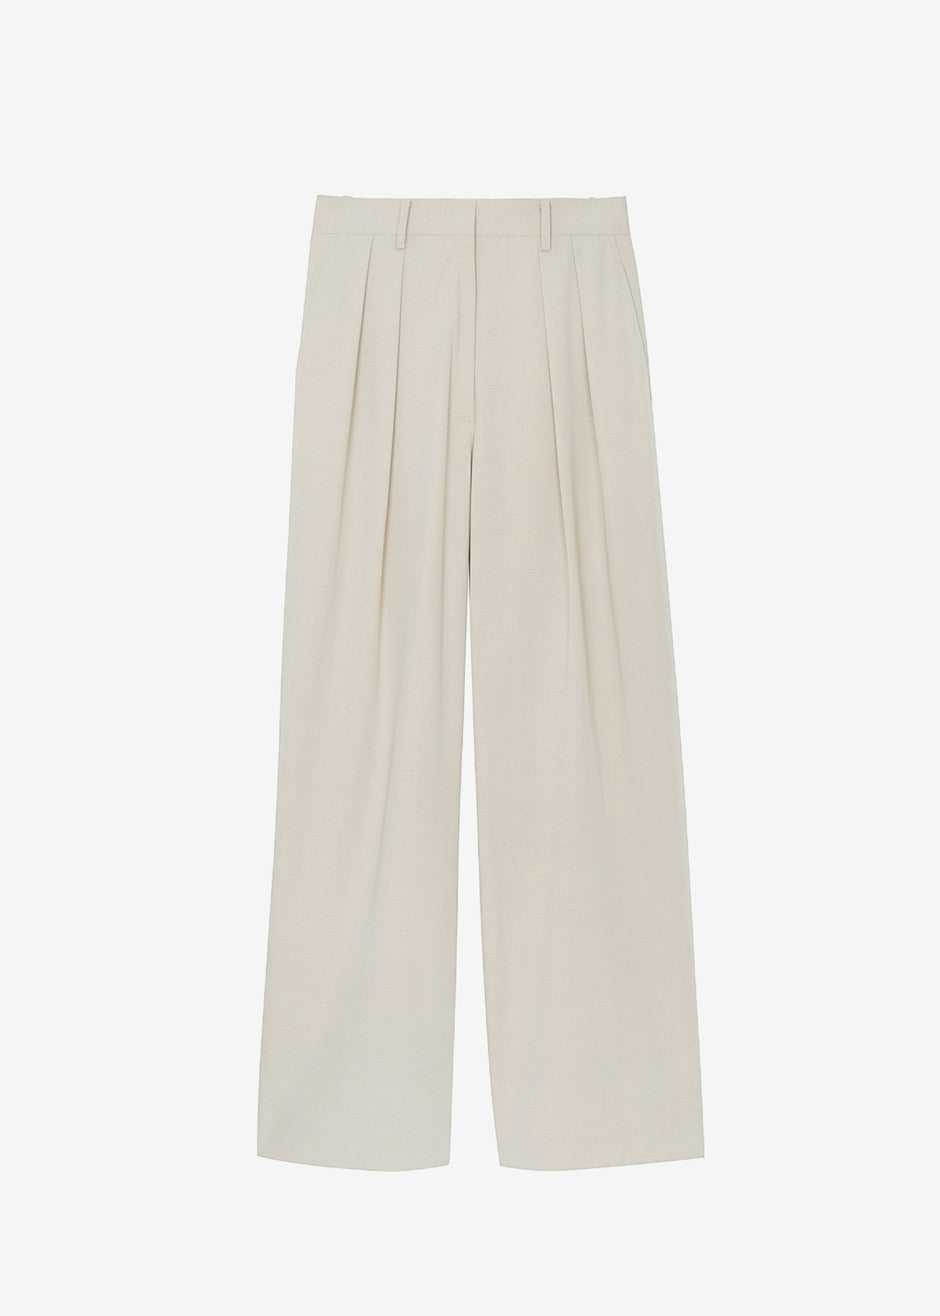 Mens pleated trousers guide  Blugiallo  Tailoring reinvented